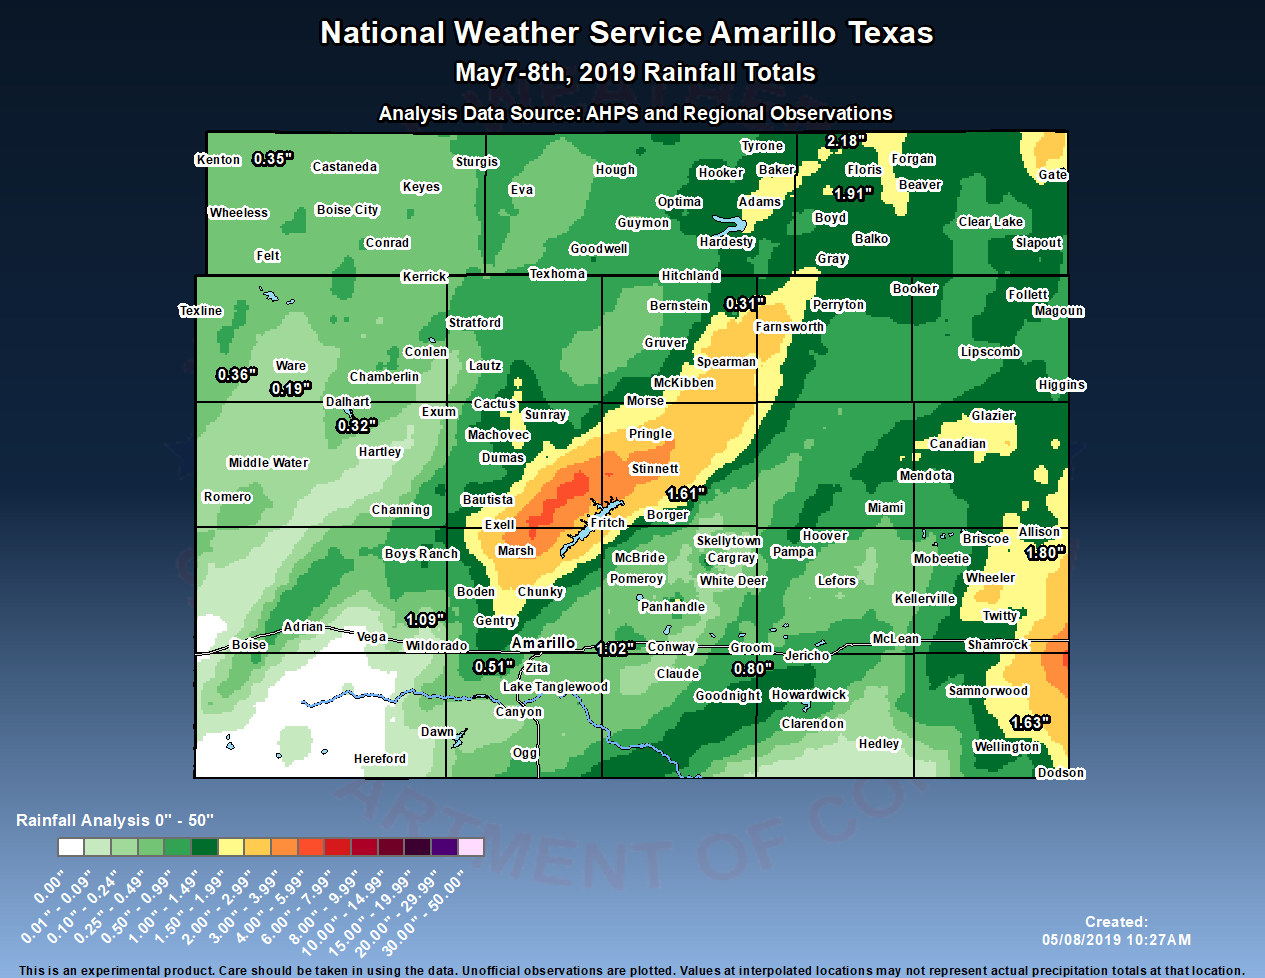 Rainfall reports and estimates from May 7th